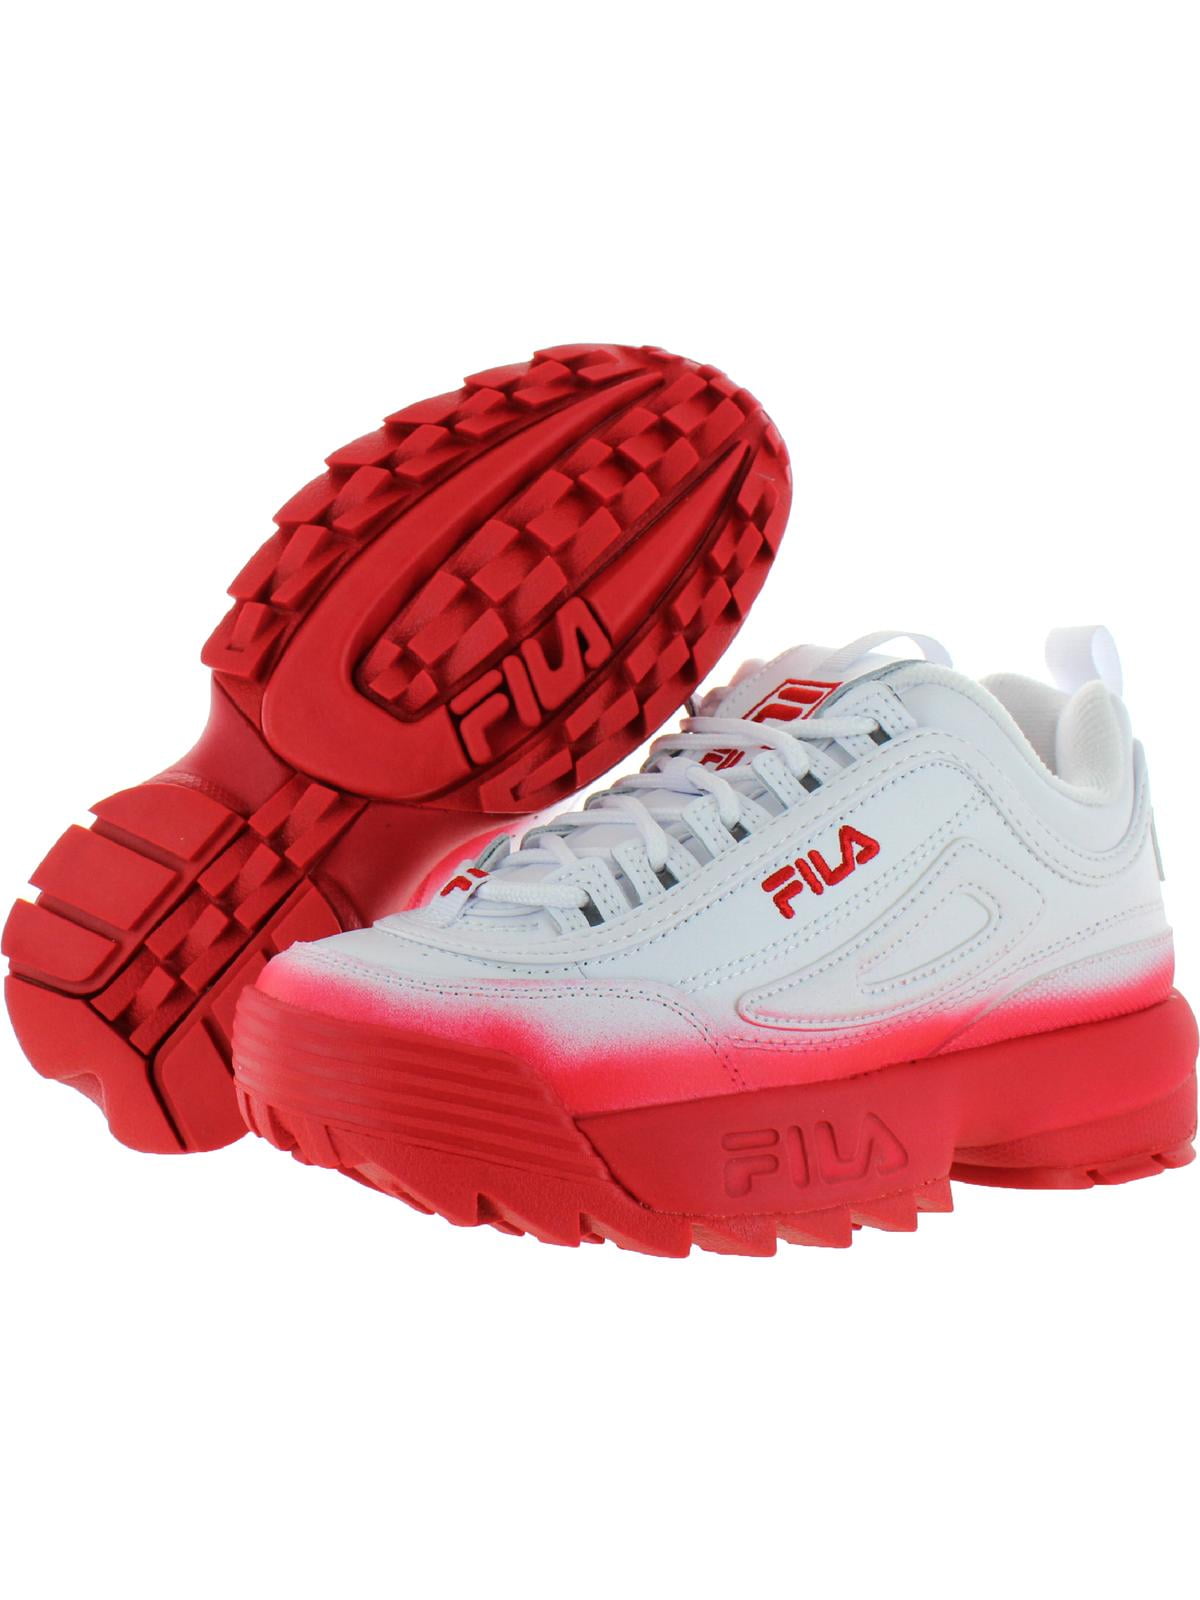 bypass Indica indeks Fila Women's Disruptor Ii Brights Fade White / Red Ankle-High Leather Wedge  Sneakers - 5M - Walmart.com